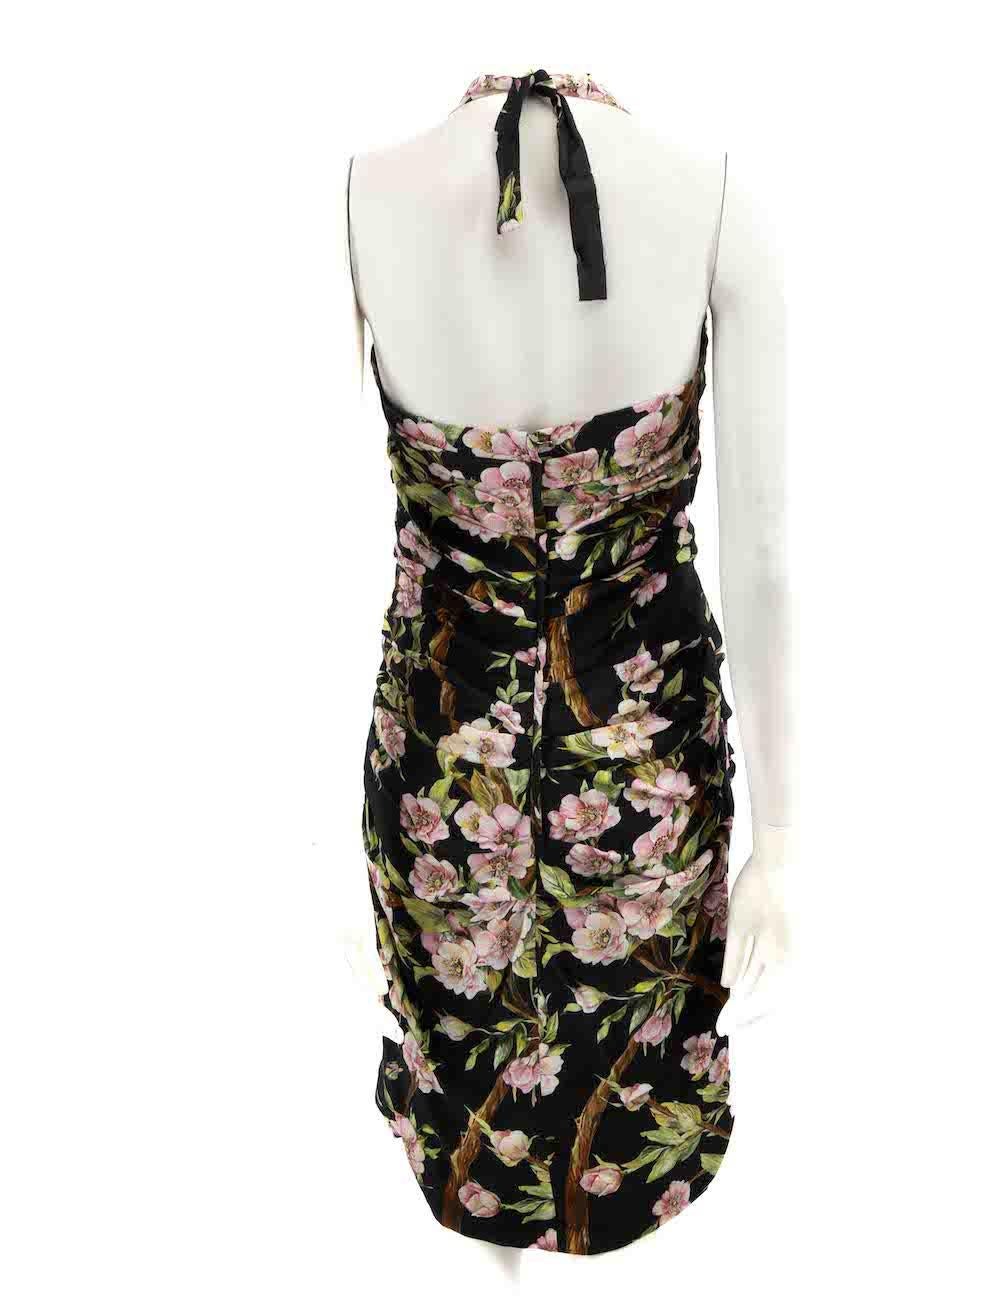 Dolce & Gabbana Black Floral Halterneck Dress Size M In Good Condition For Sale In London, GB